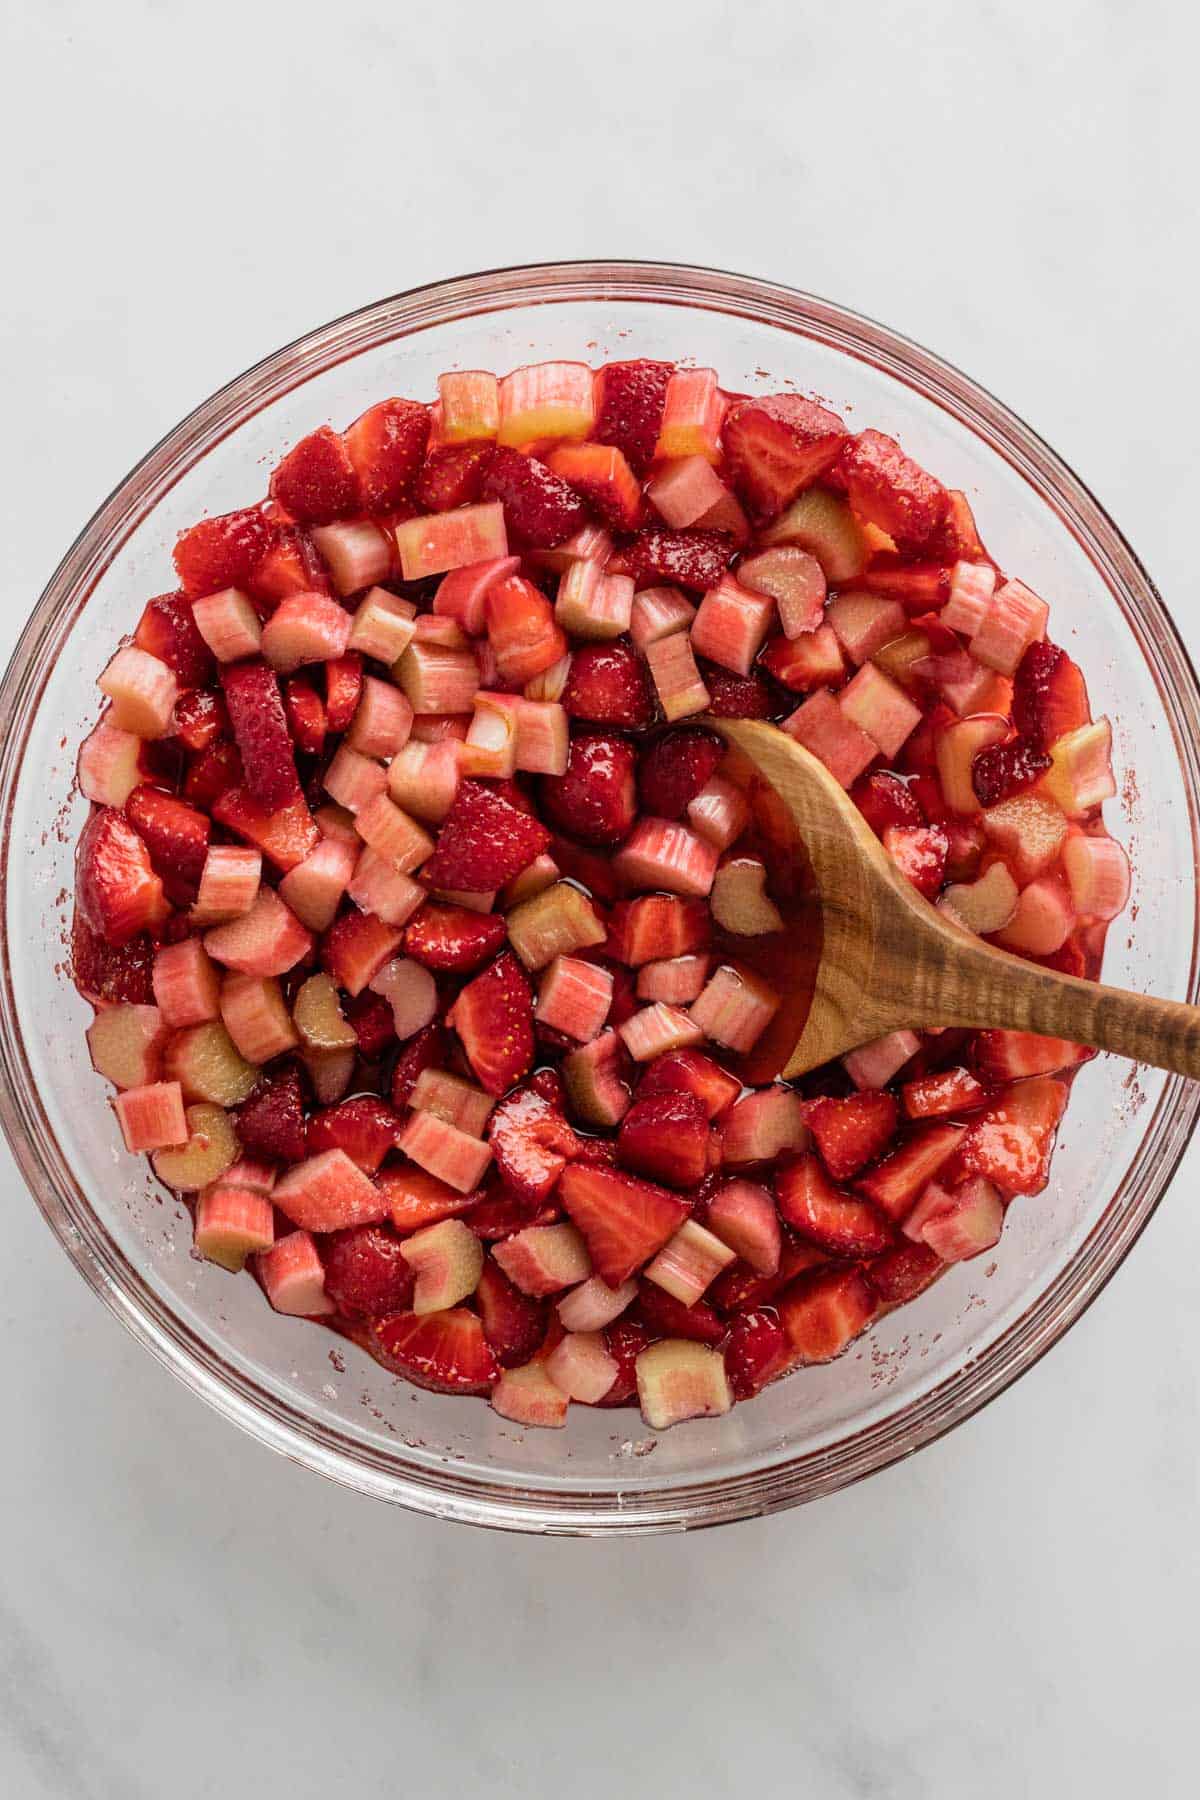 diced strawberries and rhubarb in mixing bowl